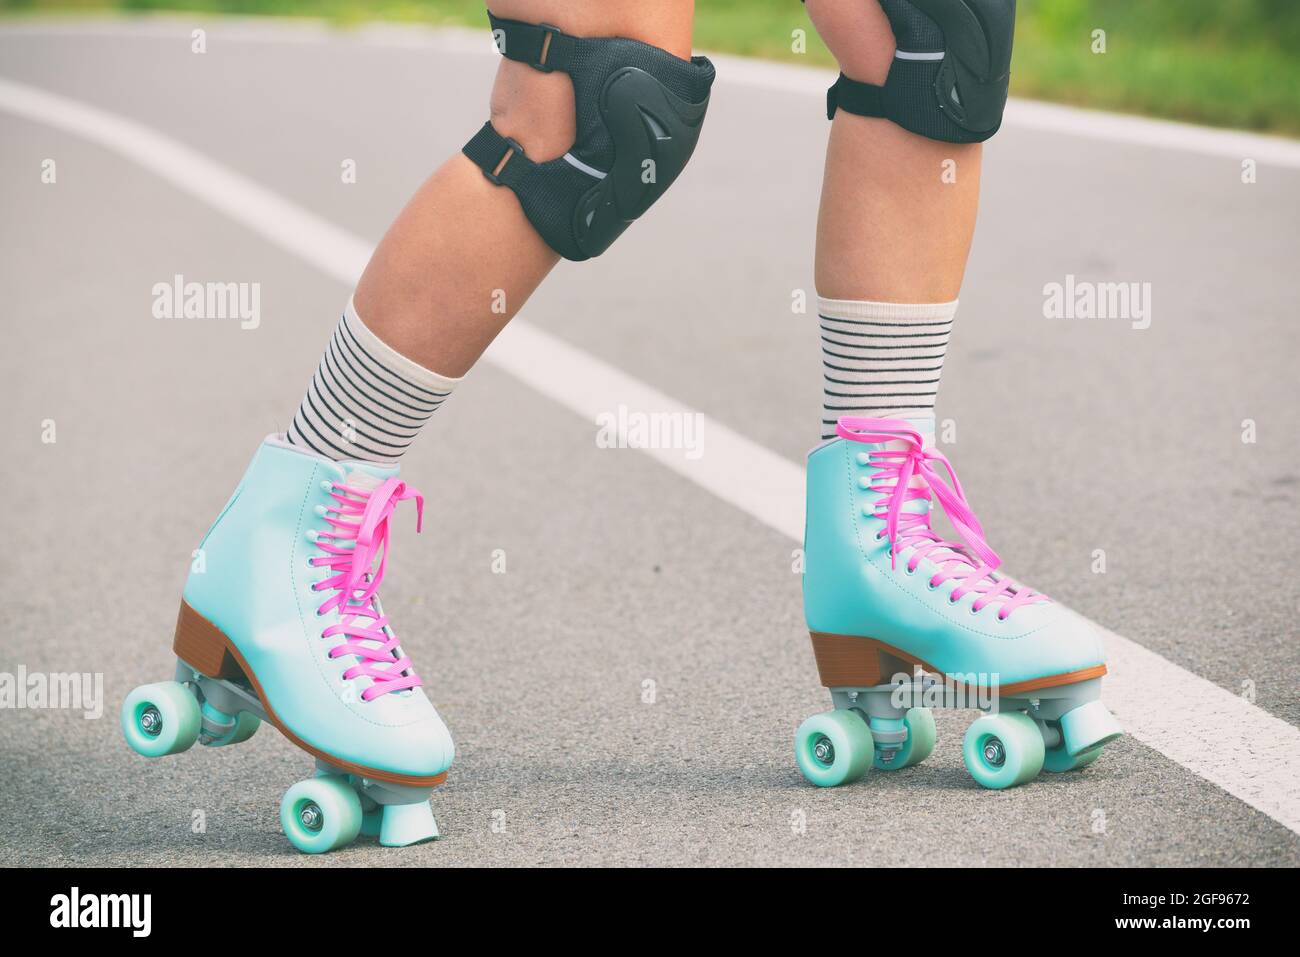 Woman rollerskater wearing knee protector pads on her leg Stock Photo